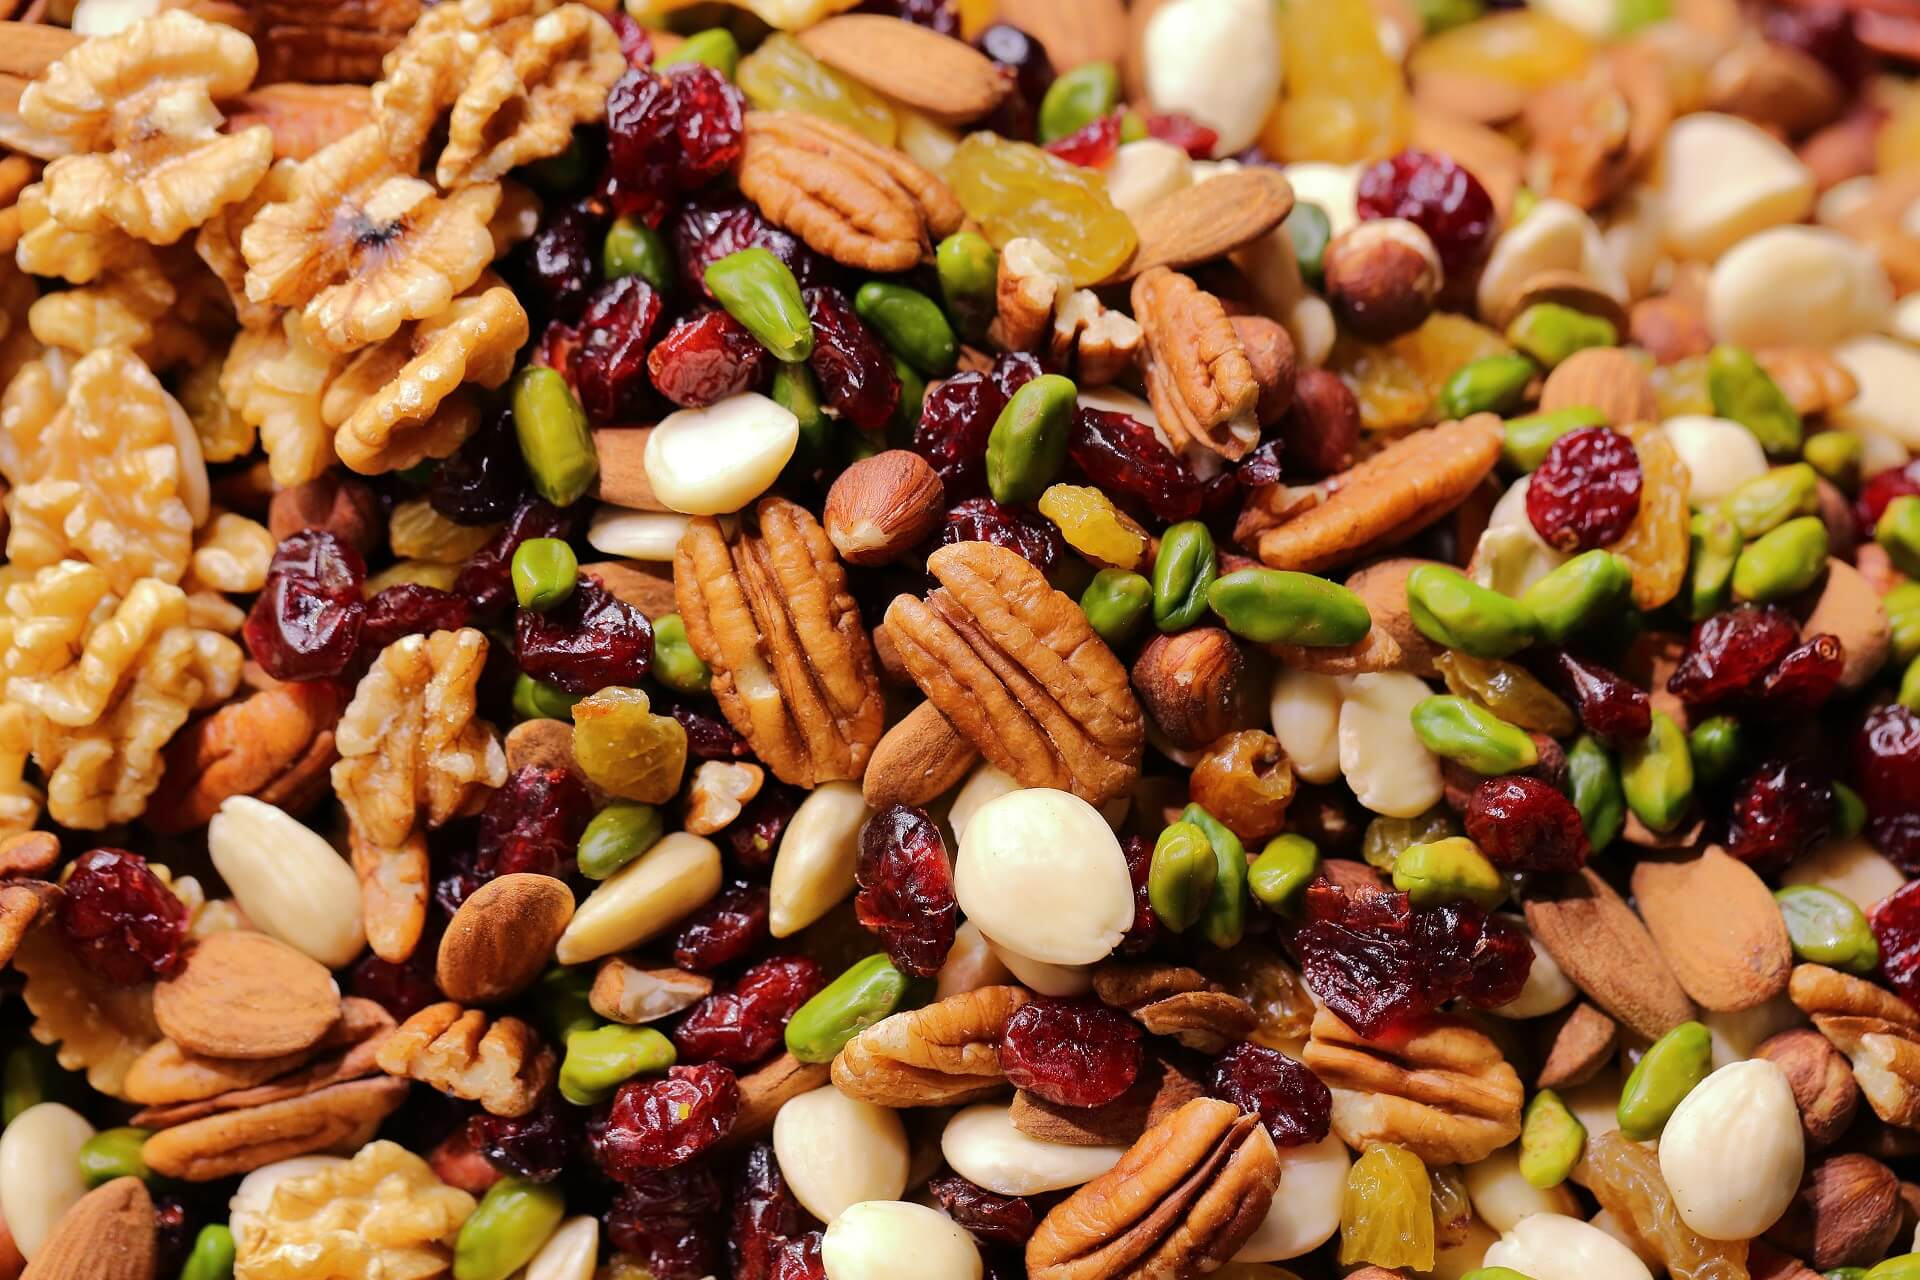 Dry Fruits Stores | Dry Fruits Supplier In Chennai | Dry Fruits Wholesalers In Chennai